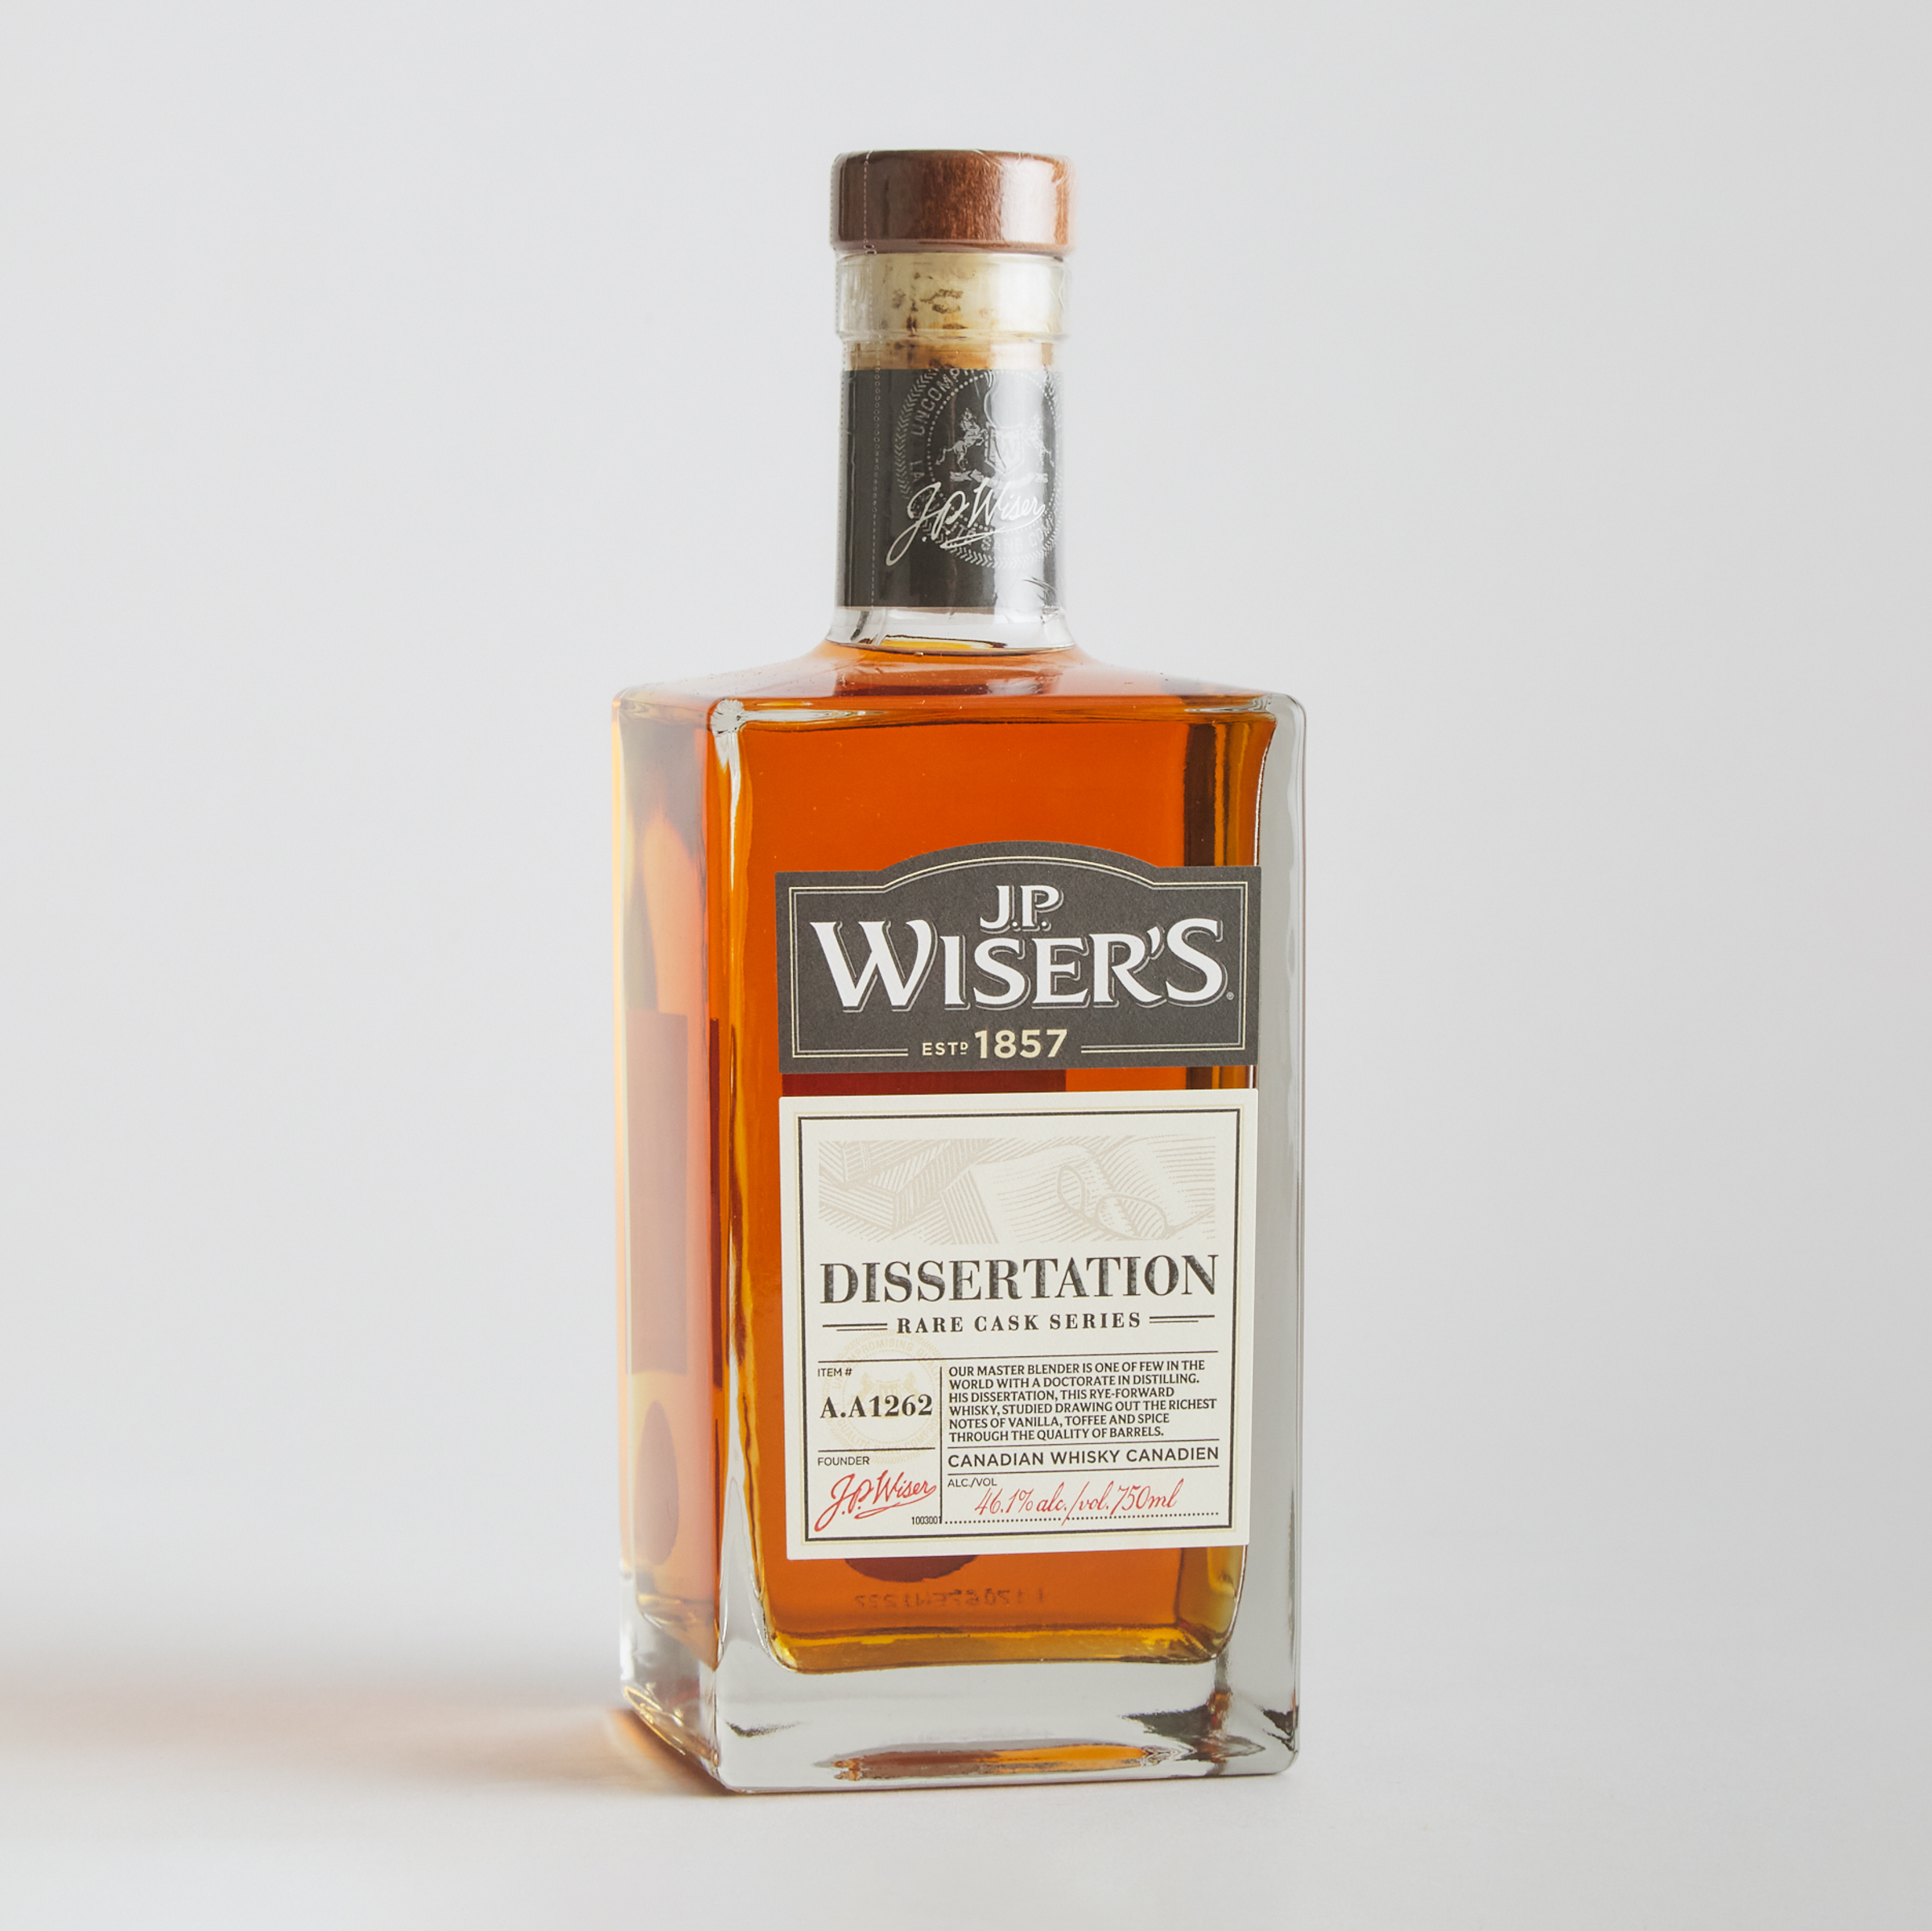 J.P. WISER’S CANADIAN WHISKY NAS (ONE 750 ML)